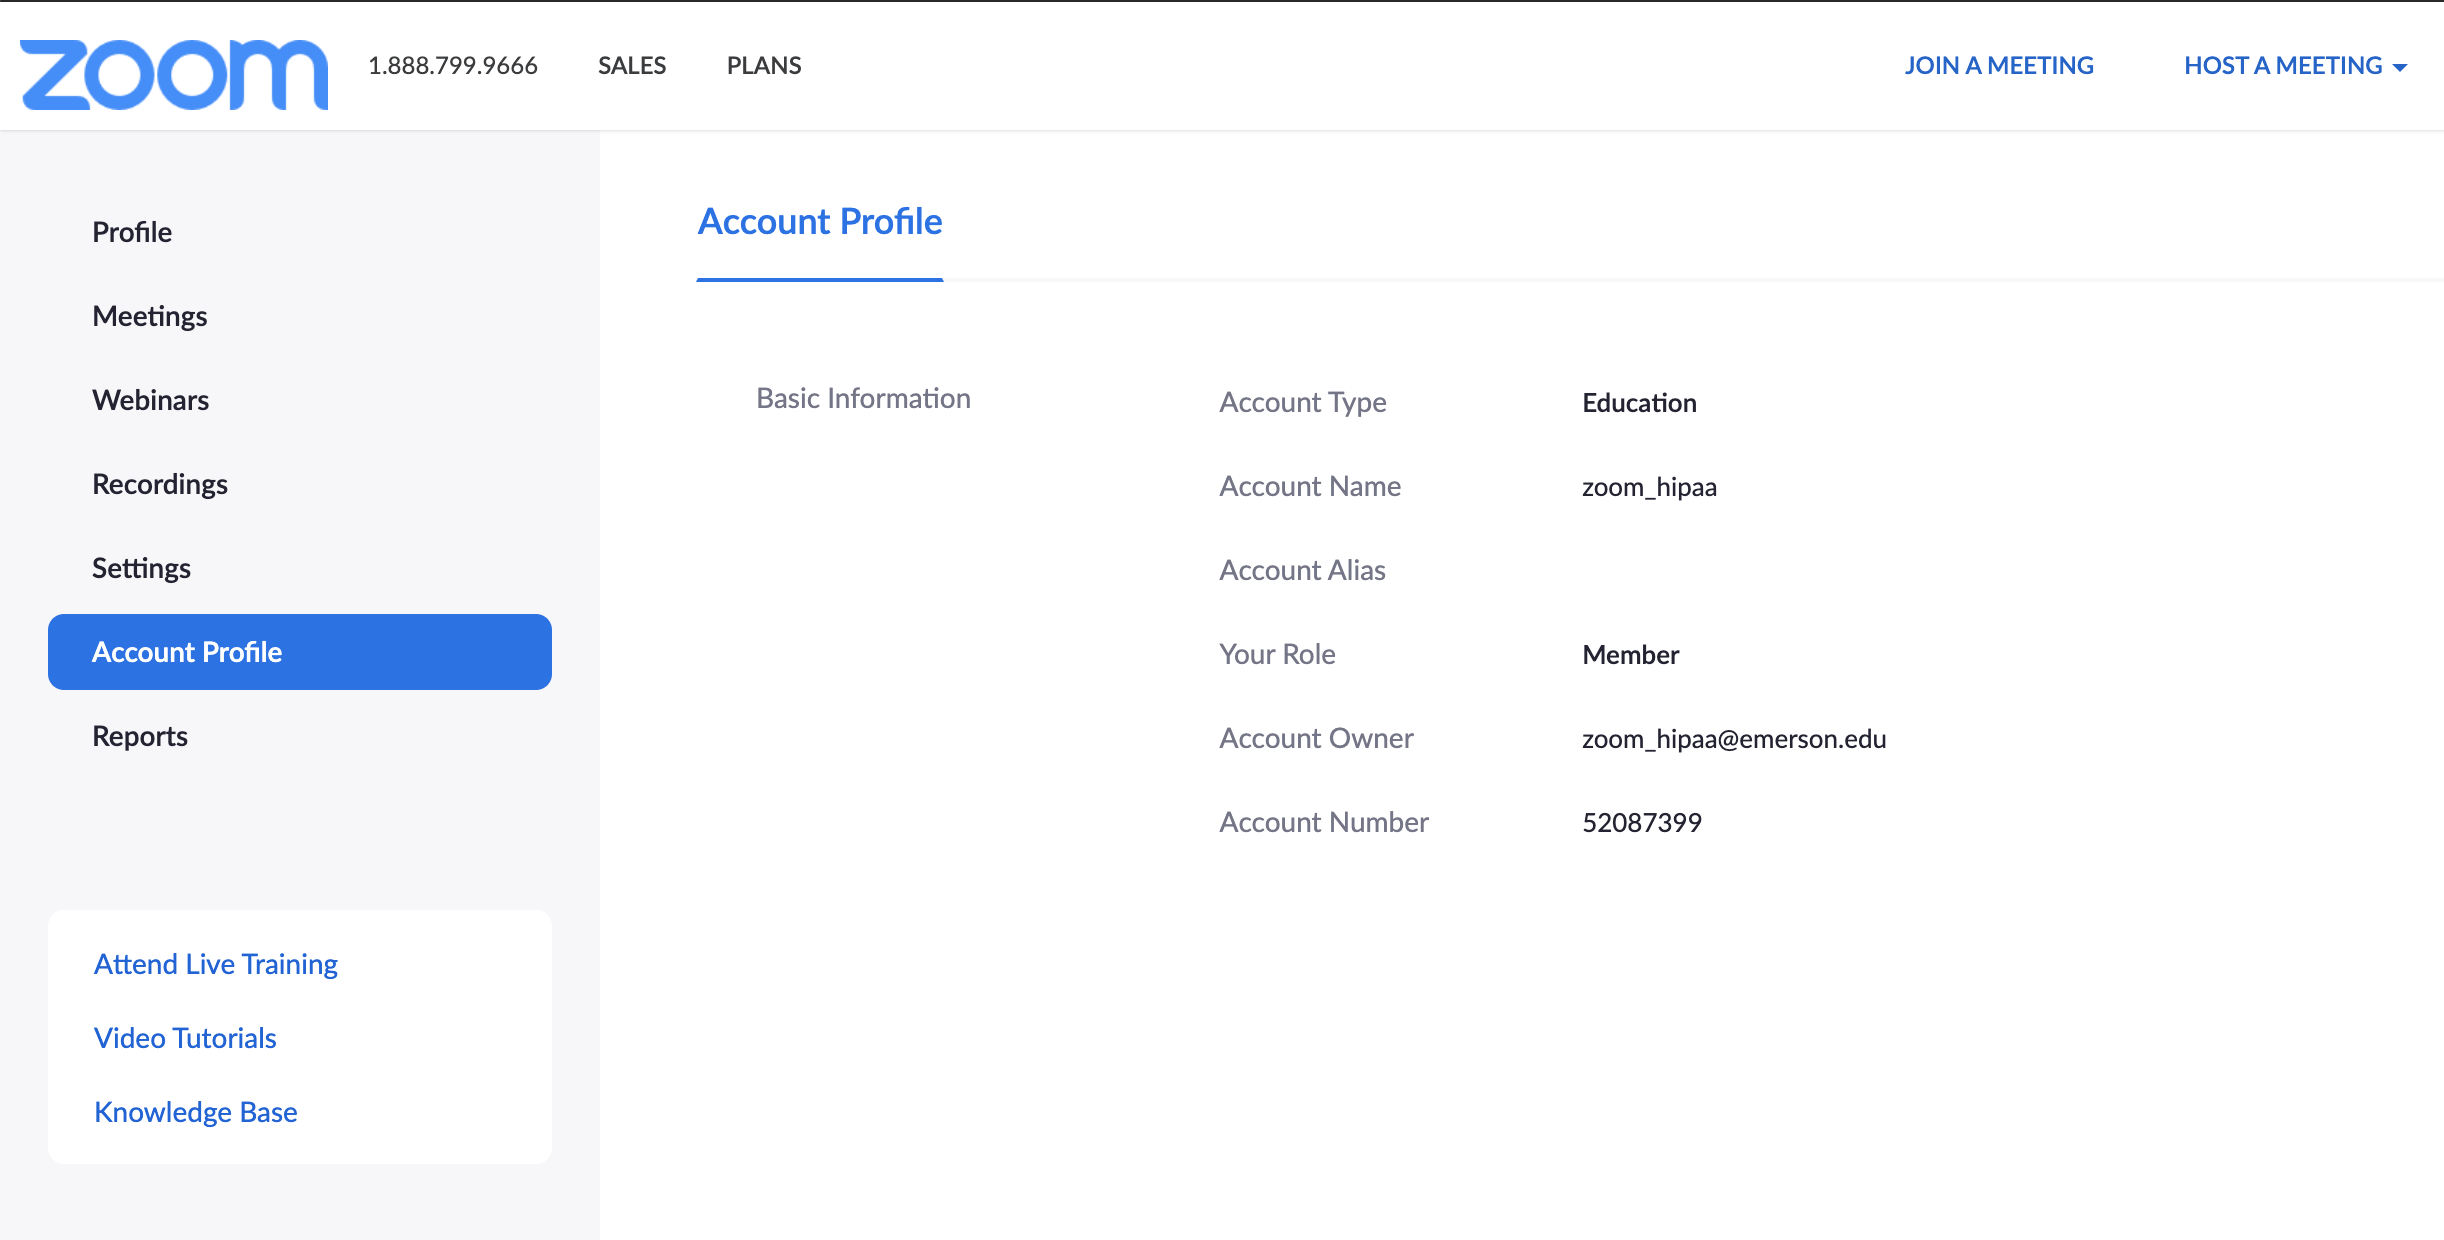 A screenshot of the Zoom 'Account Profile' at zoom.emerson.edu that lists 'zoom_hipaa' as the 'Account Name'.